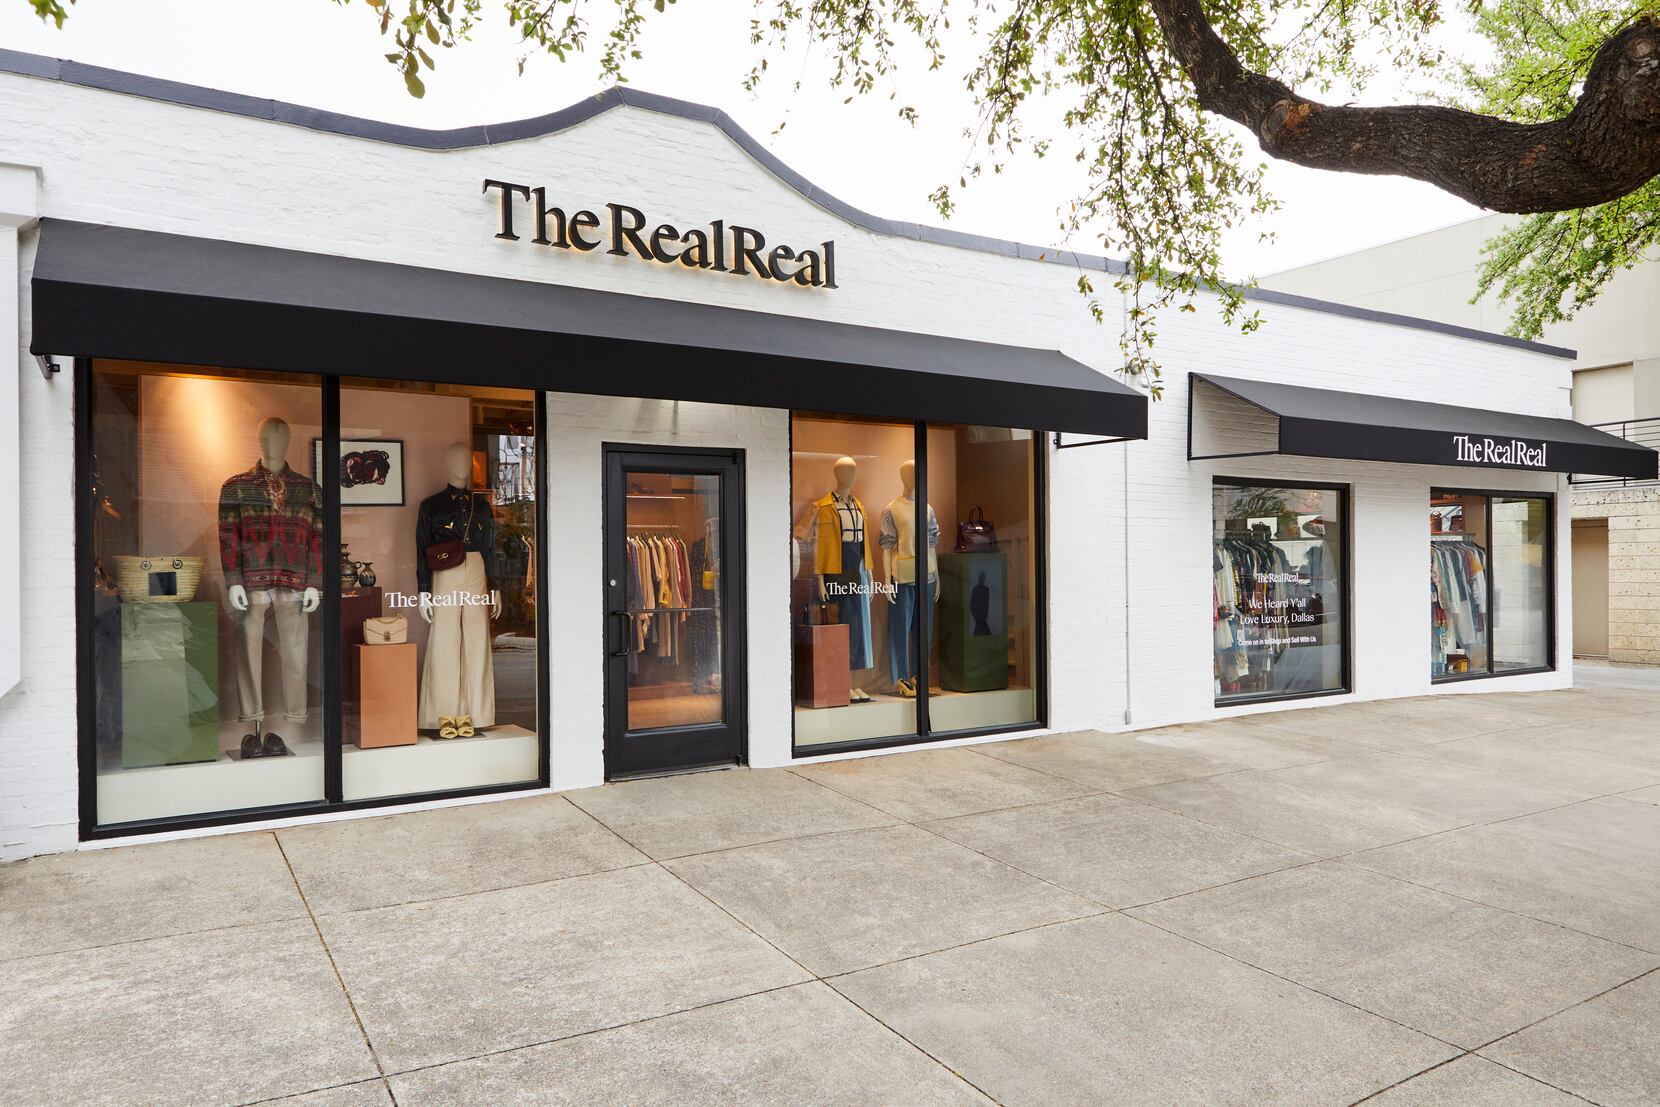 The RealReal upgrades second hand Luxury shopping - ABC7 New York